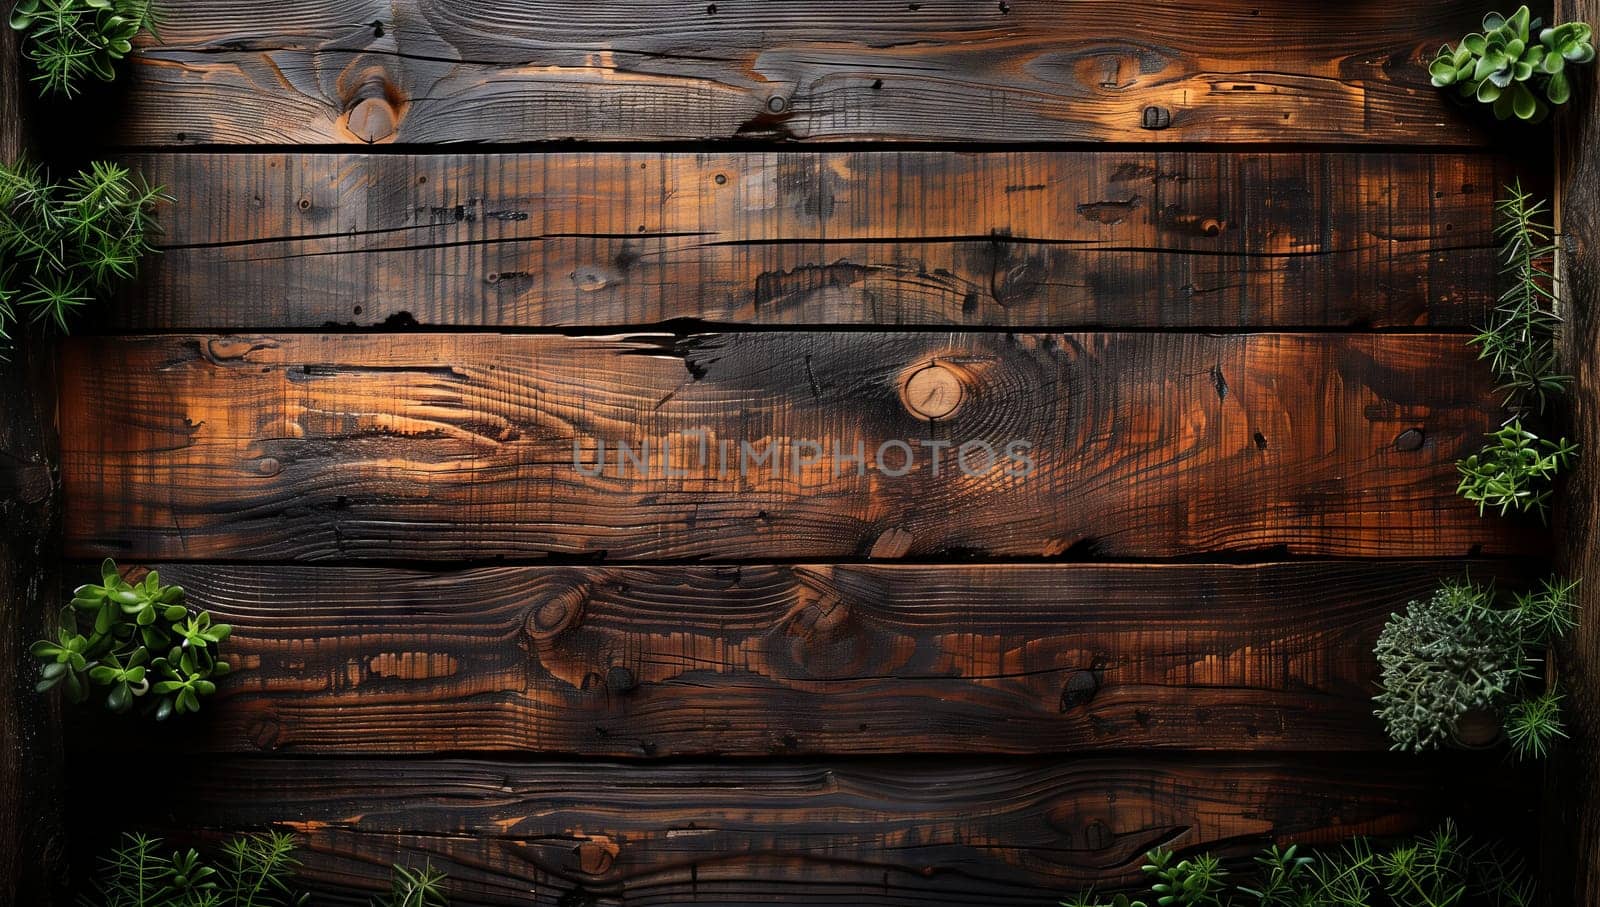 A wooden wall framed with lush greenery, creating a natural landscape art piece by richwolf